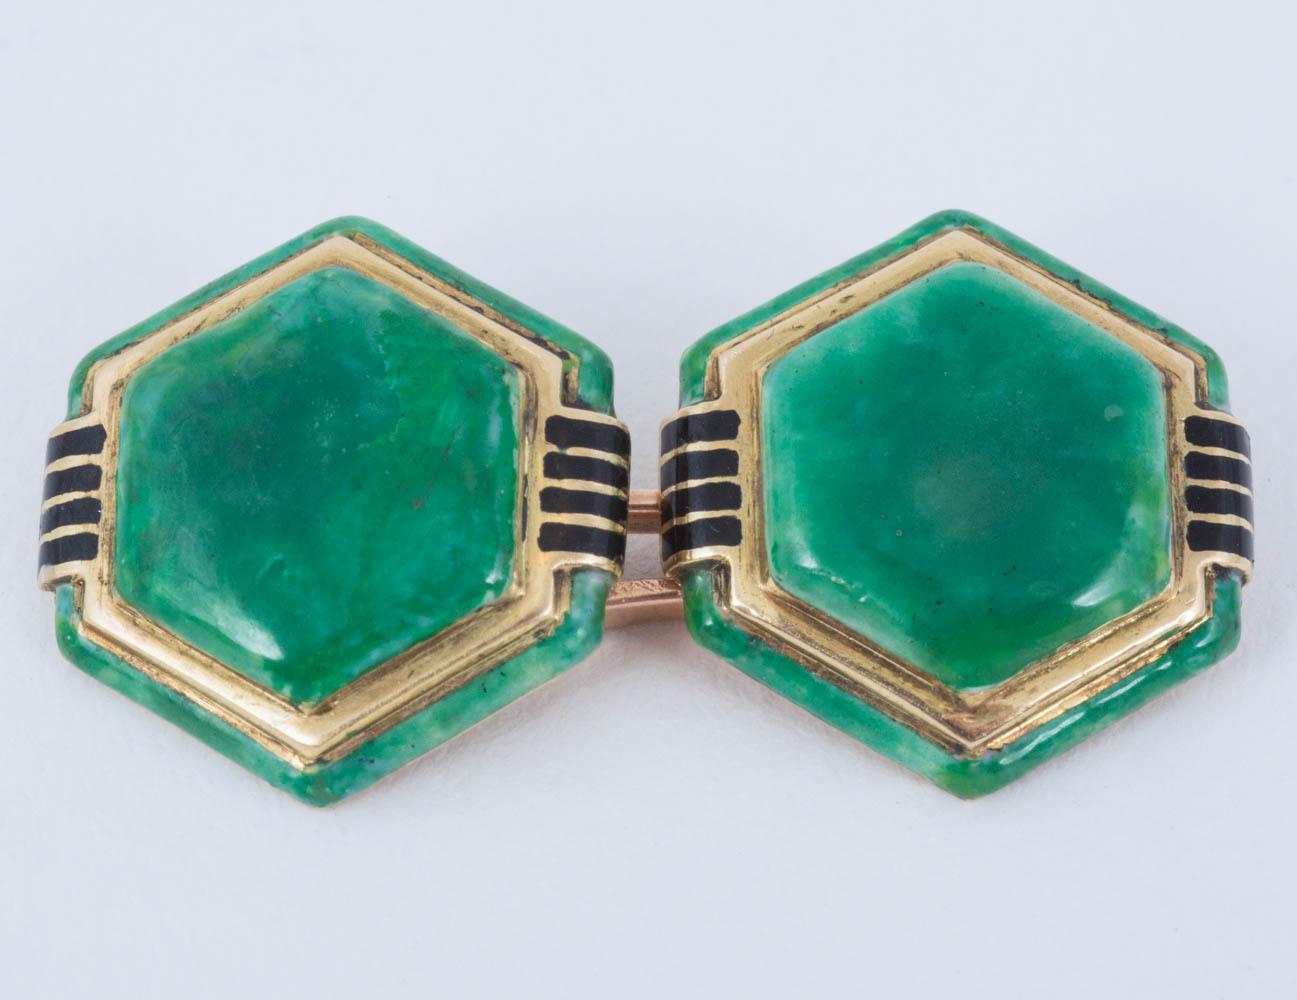 A vintage pair of Art Deco hexagonal double sided cufflinks with jade enamel and black enamel shoulder decoration, mounted in 18 karat yellow gold.
Measures 15mm across.
1920's Vintage piece.
20th century, French circa 1925-1930.

Stock no. 1743